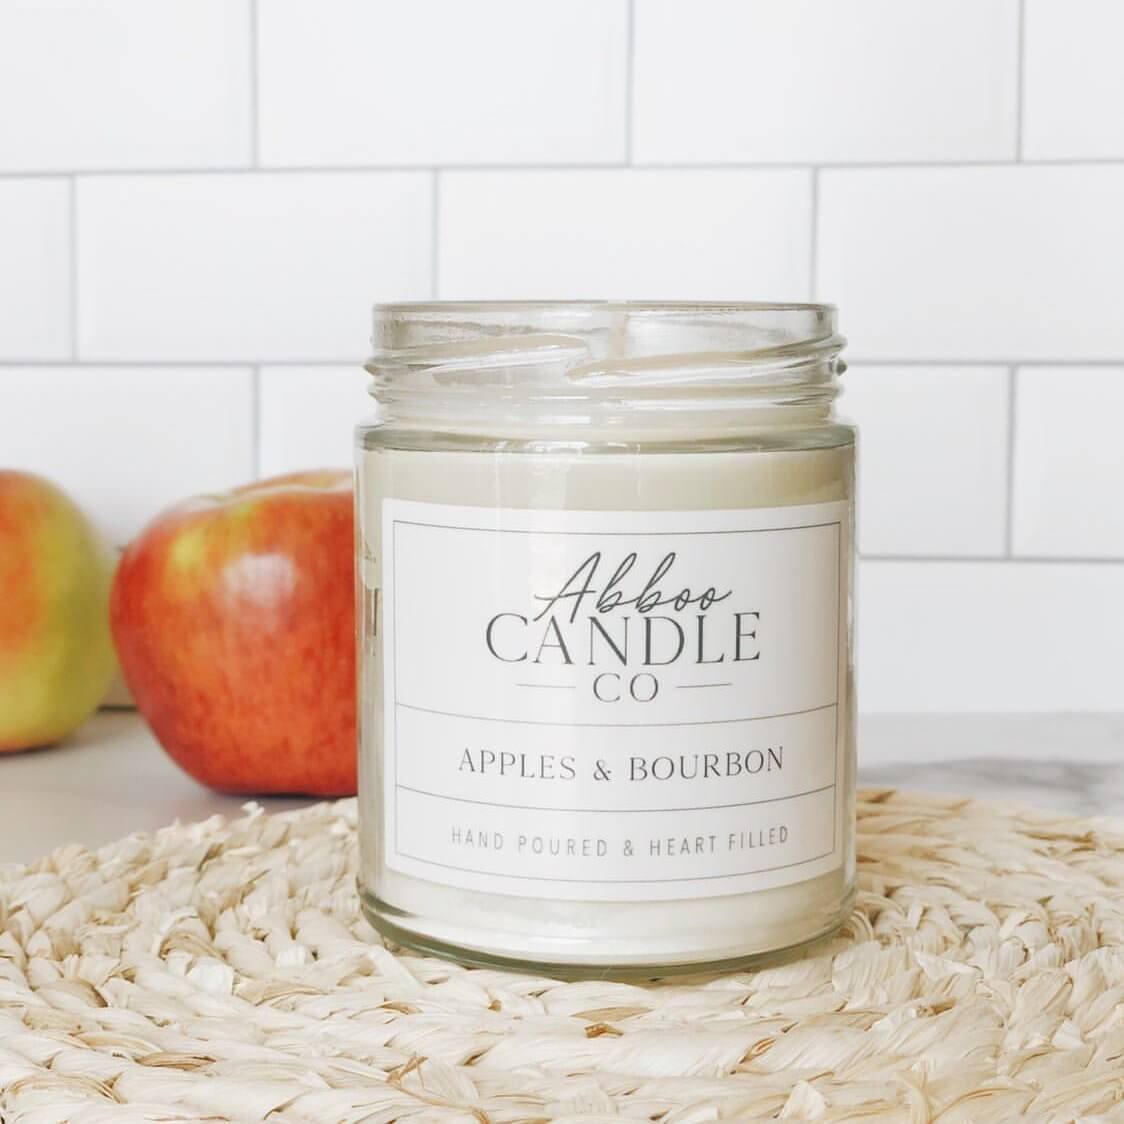 Apples and Bourbon Soy Candle - Abboo Candle Co